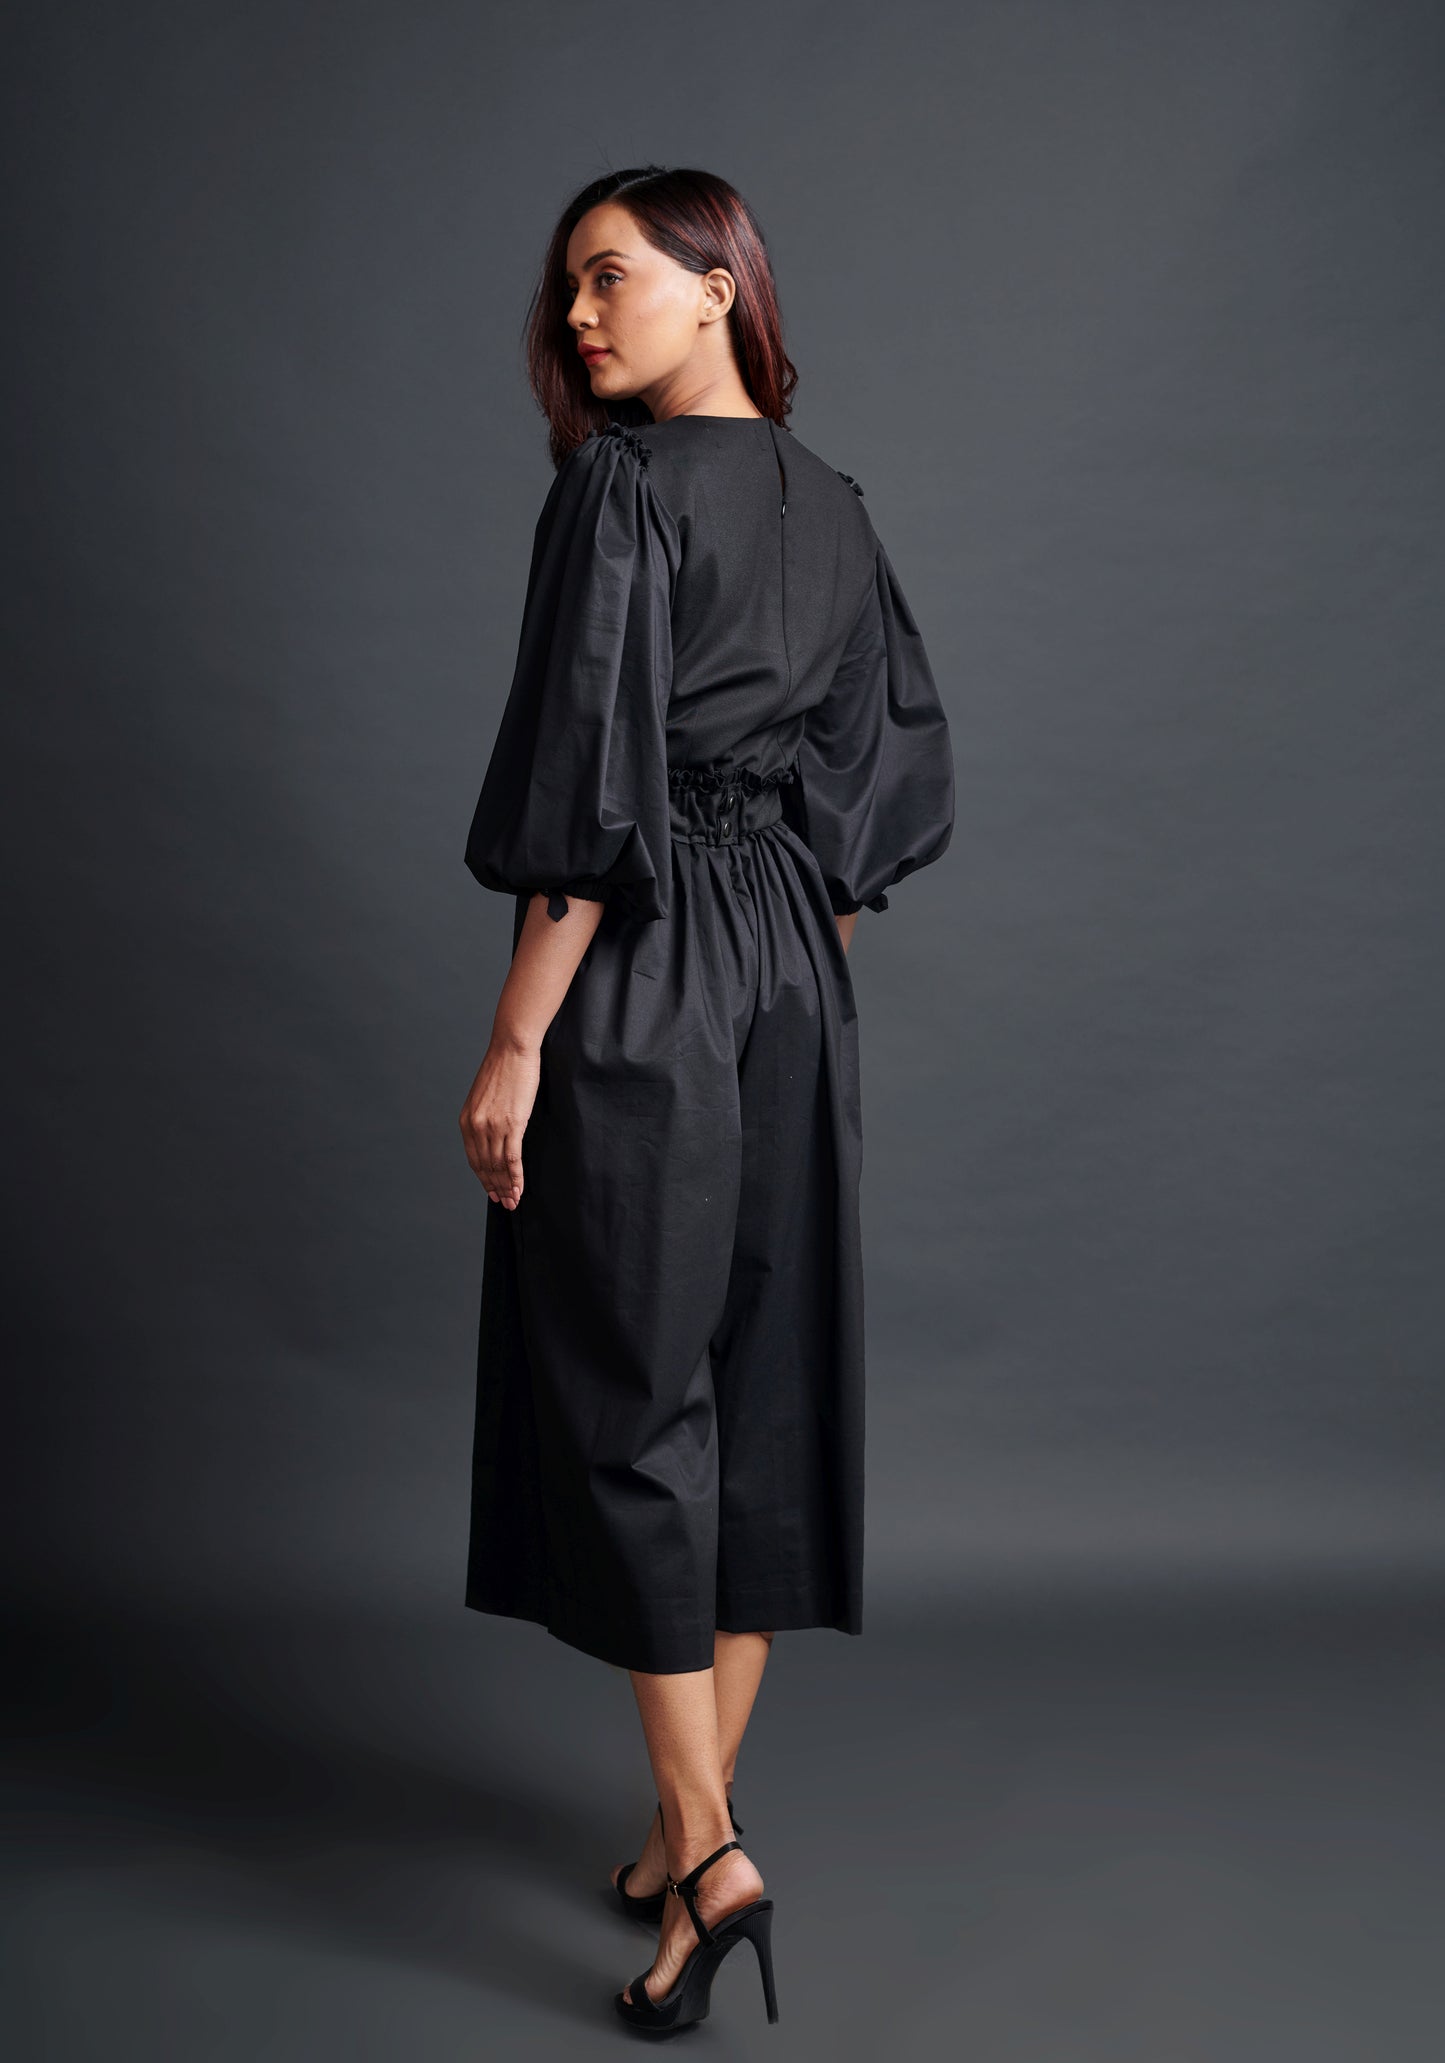 Image of BLACK MONOCROM JUMPSUIT WITH NEOE CONFETTI BELT. From savoirfashions.com